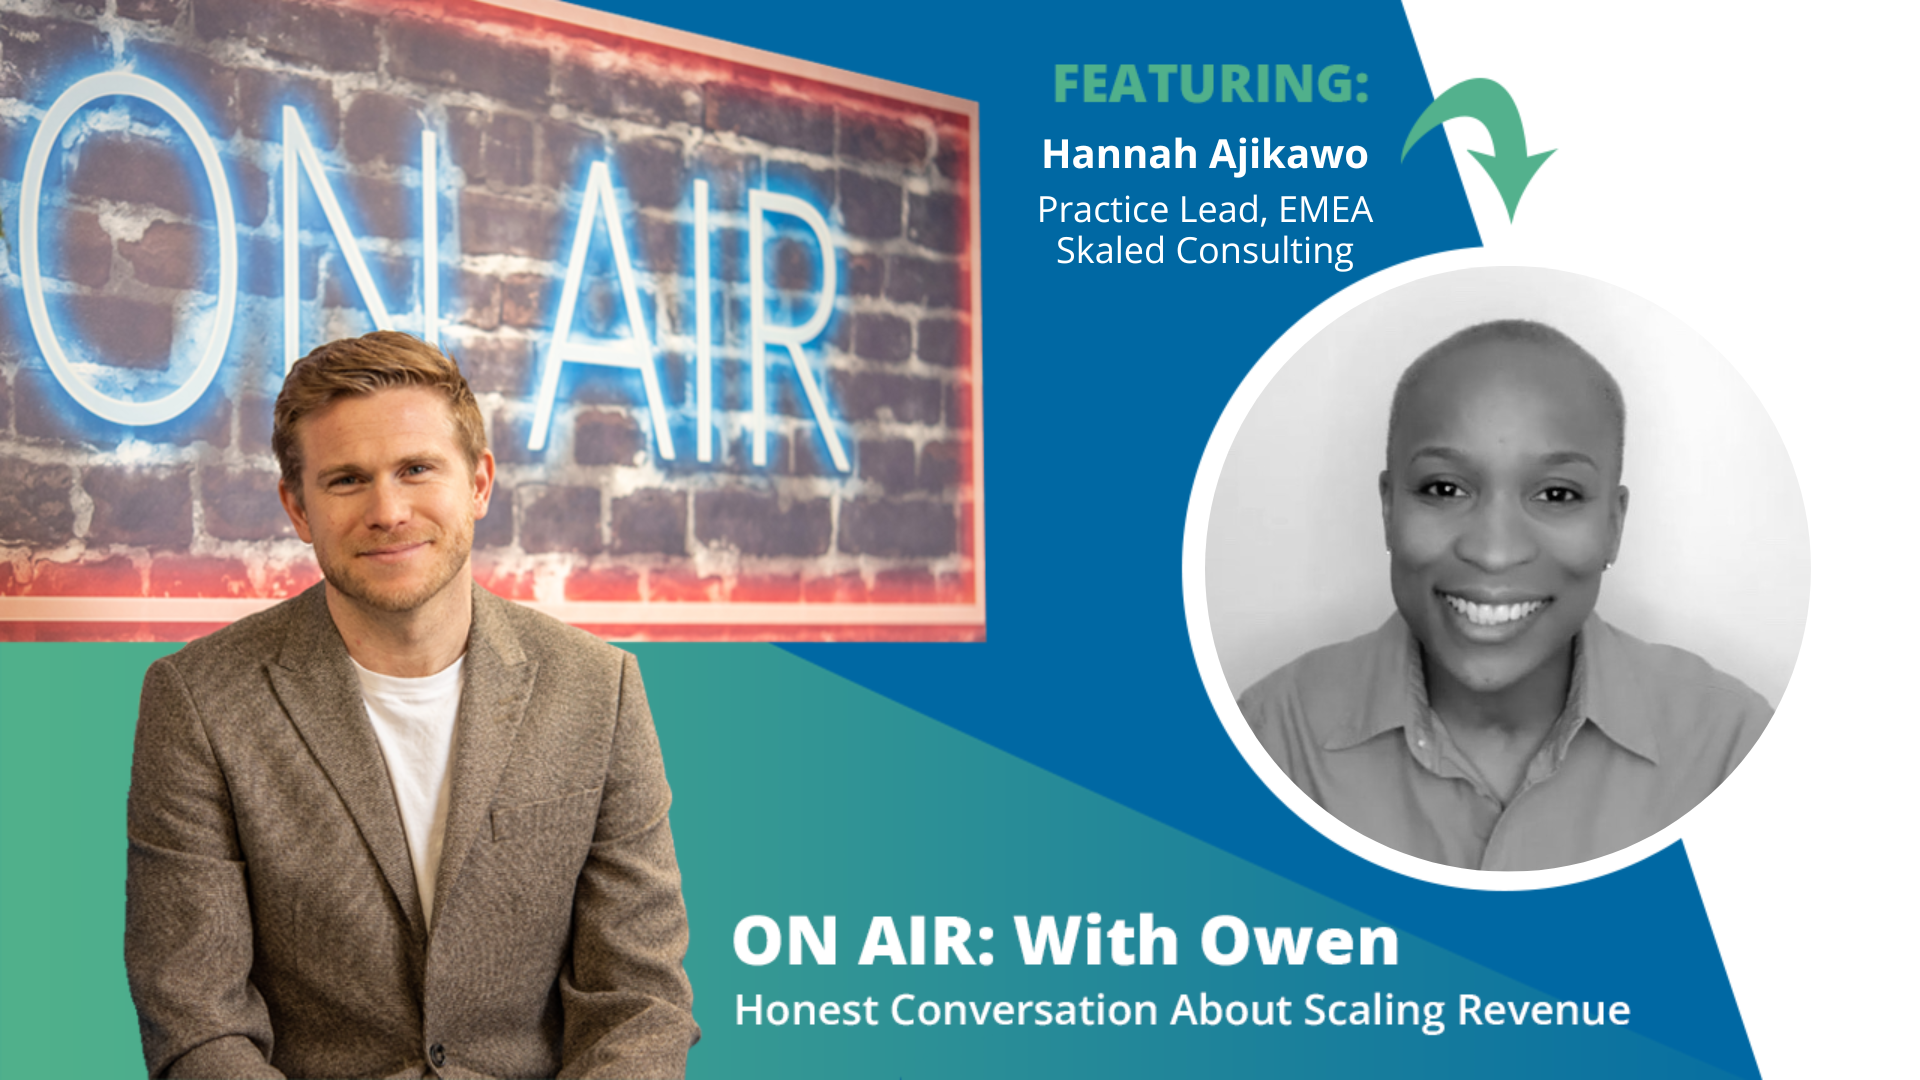 ON AIR: With Owen Episode 66 Featuring Hannah Ajikawo – Practice Lead, EMEA at Skaled Consulting